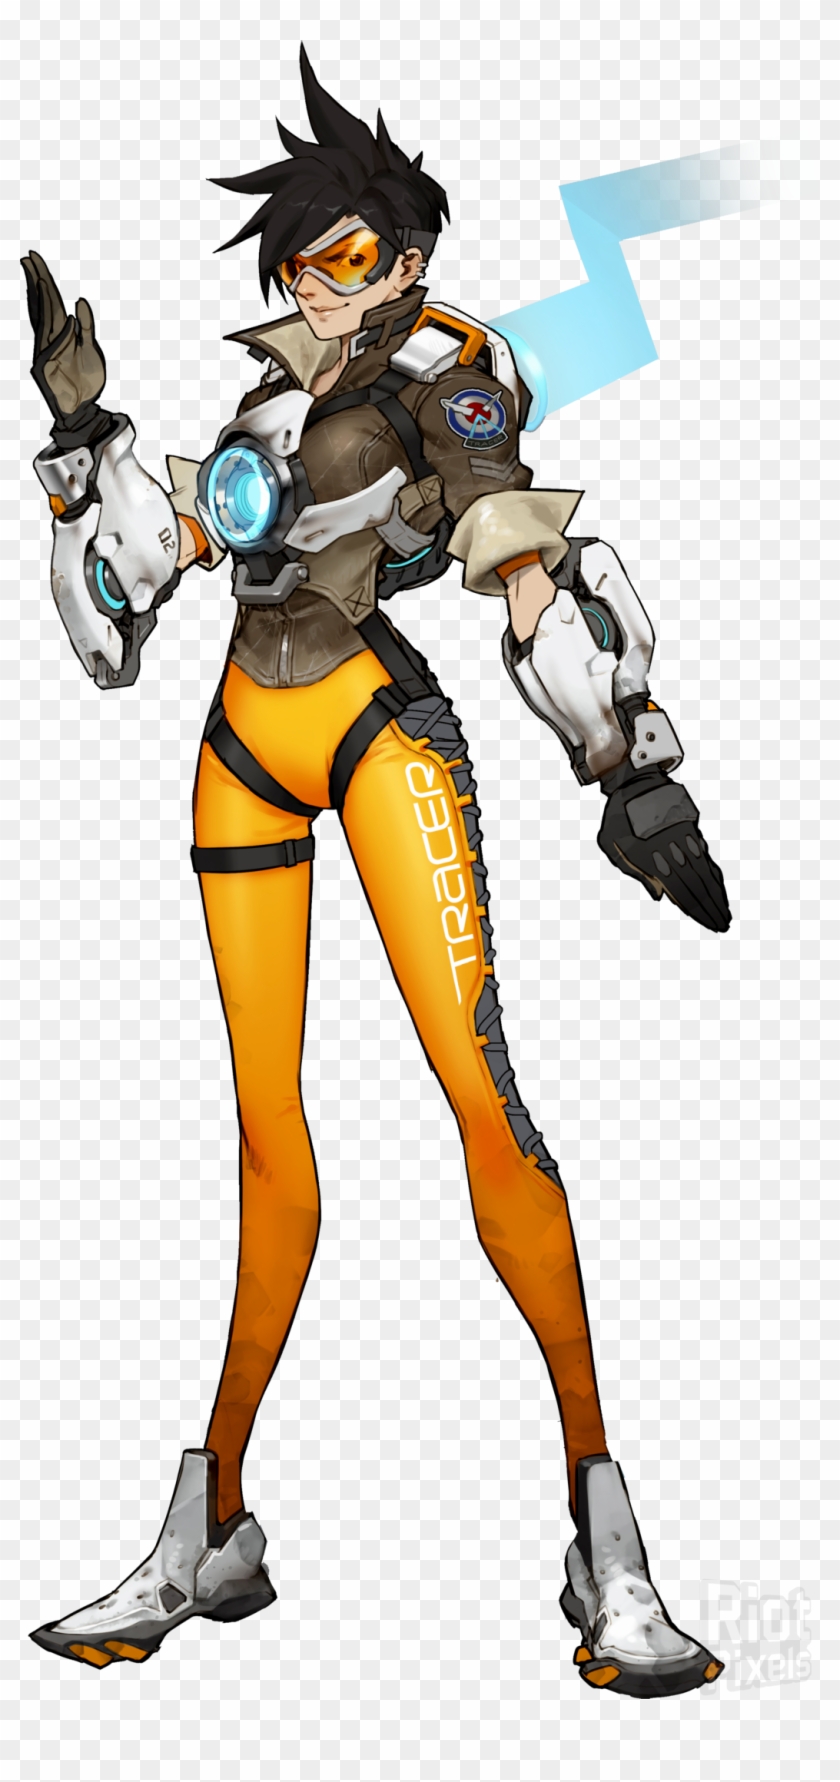 Overwatch - Tracer From Overwatch Clipart